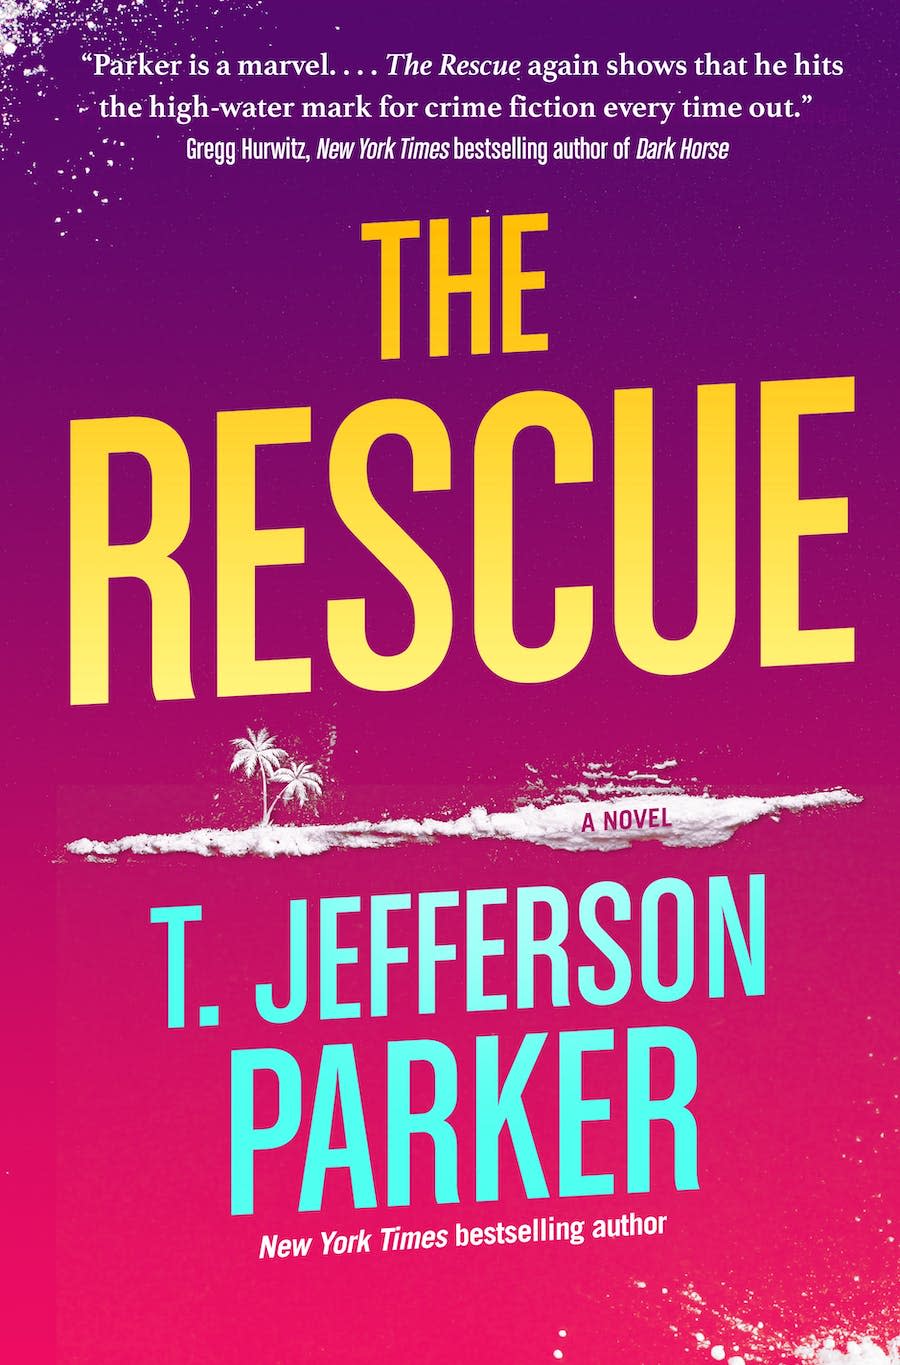 "The Rescue," by T. Jefferson Parker.